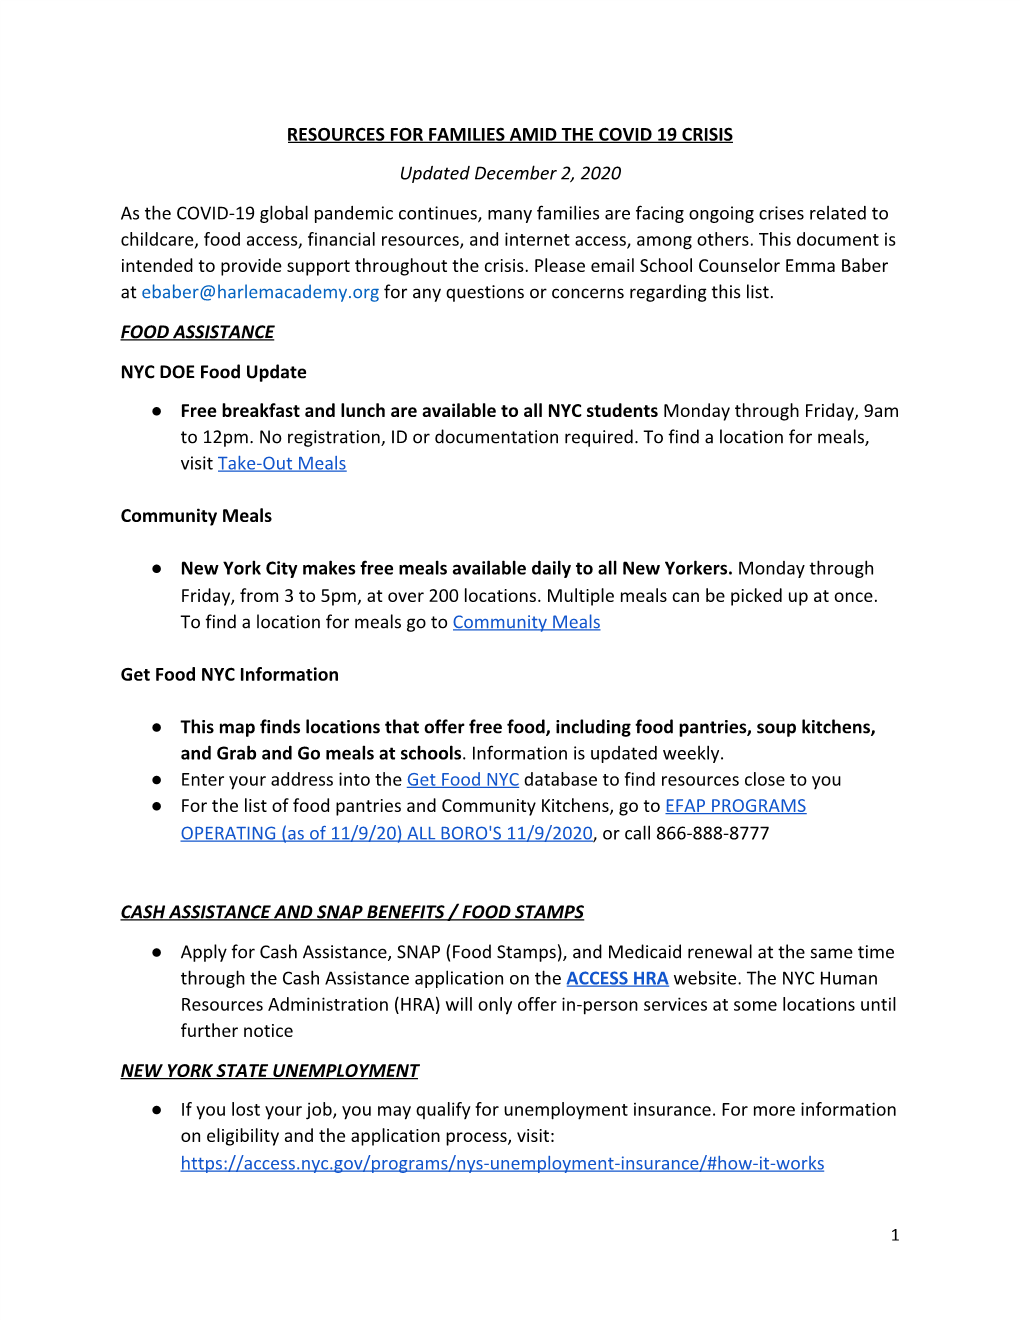 COVID RESOURCES for the LGBTQ+ COMMUNITY ● the NYC Unity Project Compiled Resources to Specifically Meet the Needs of LGBTQ+ ​ New Yorkers